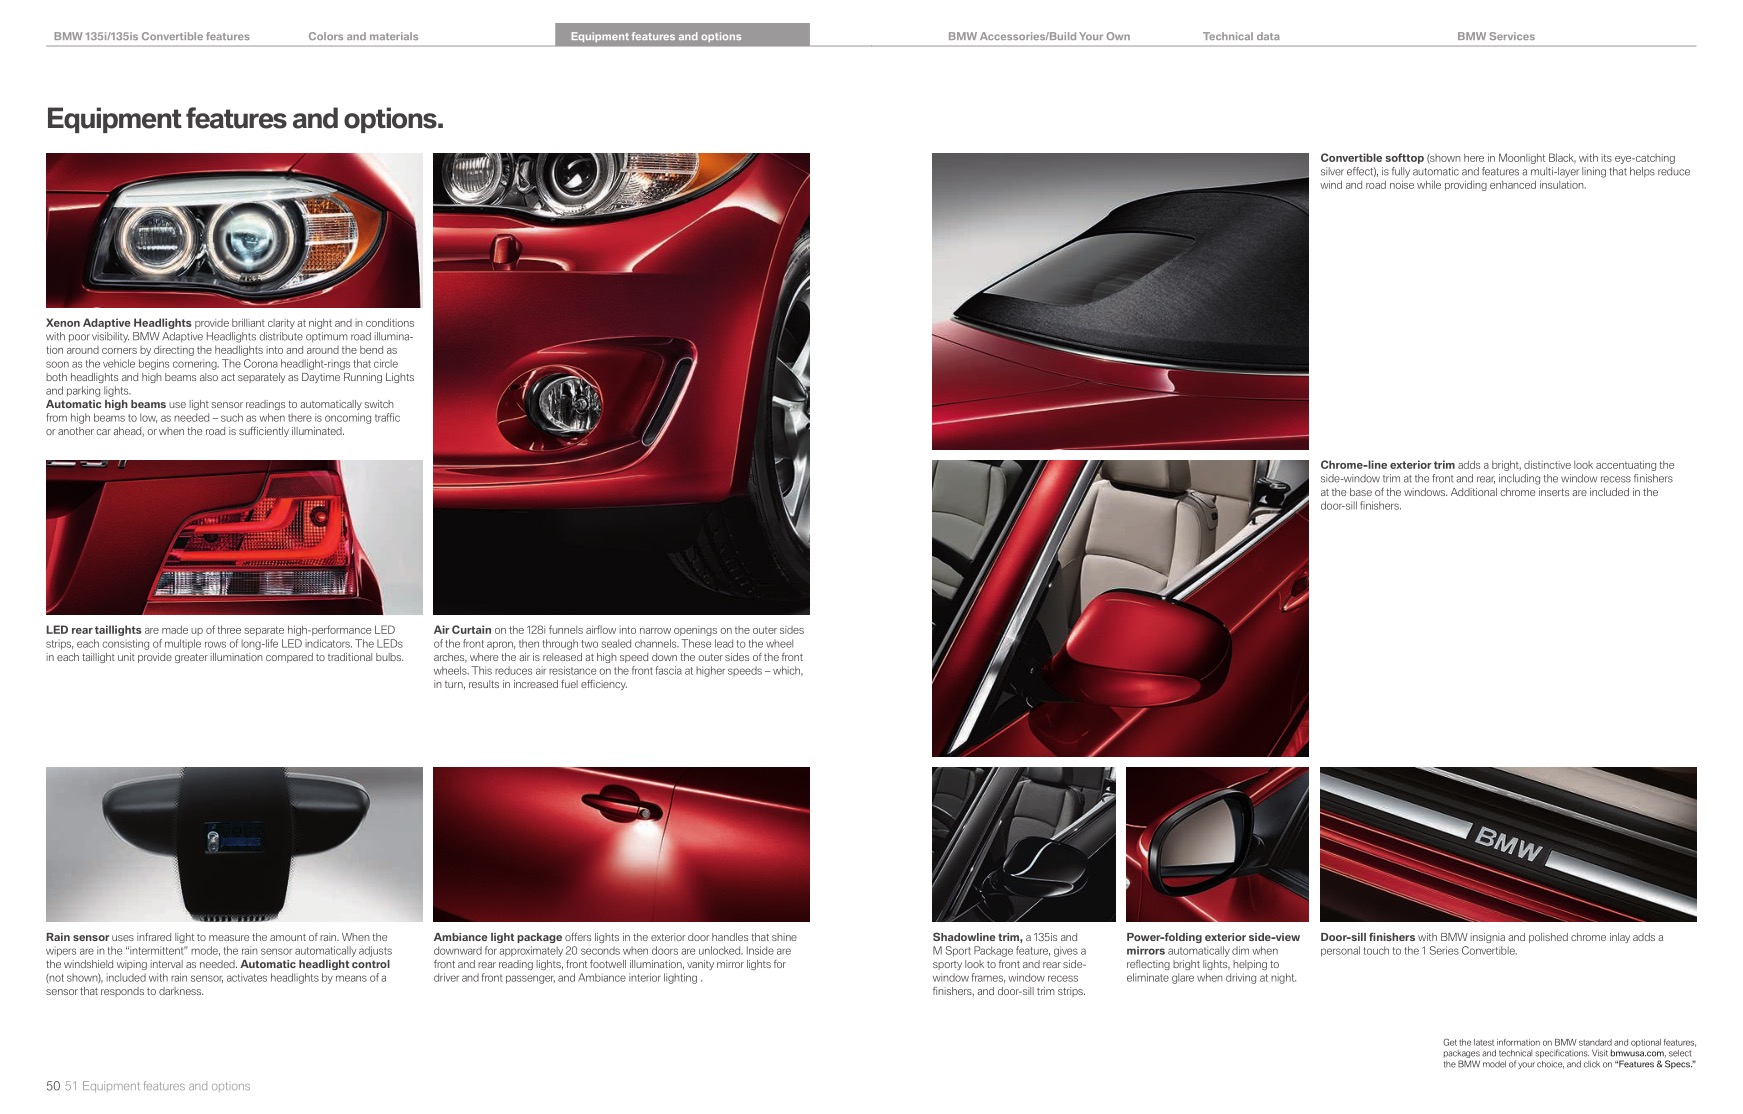 2013 BMW 1-Series Convertible Brochure Page 13